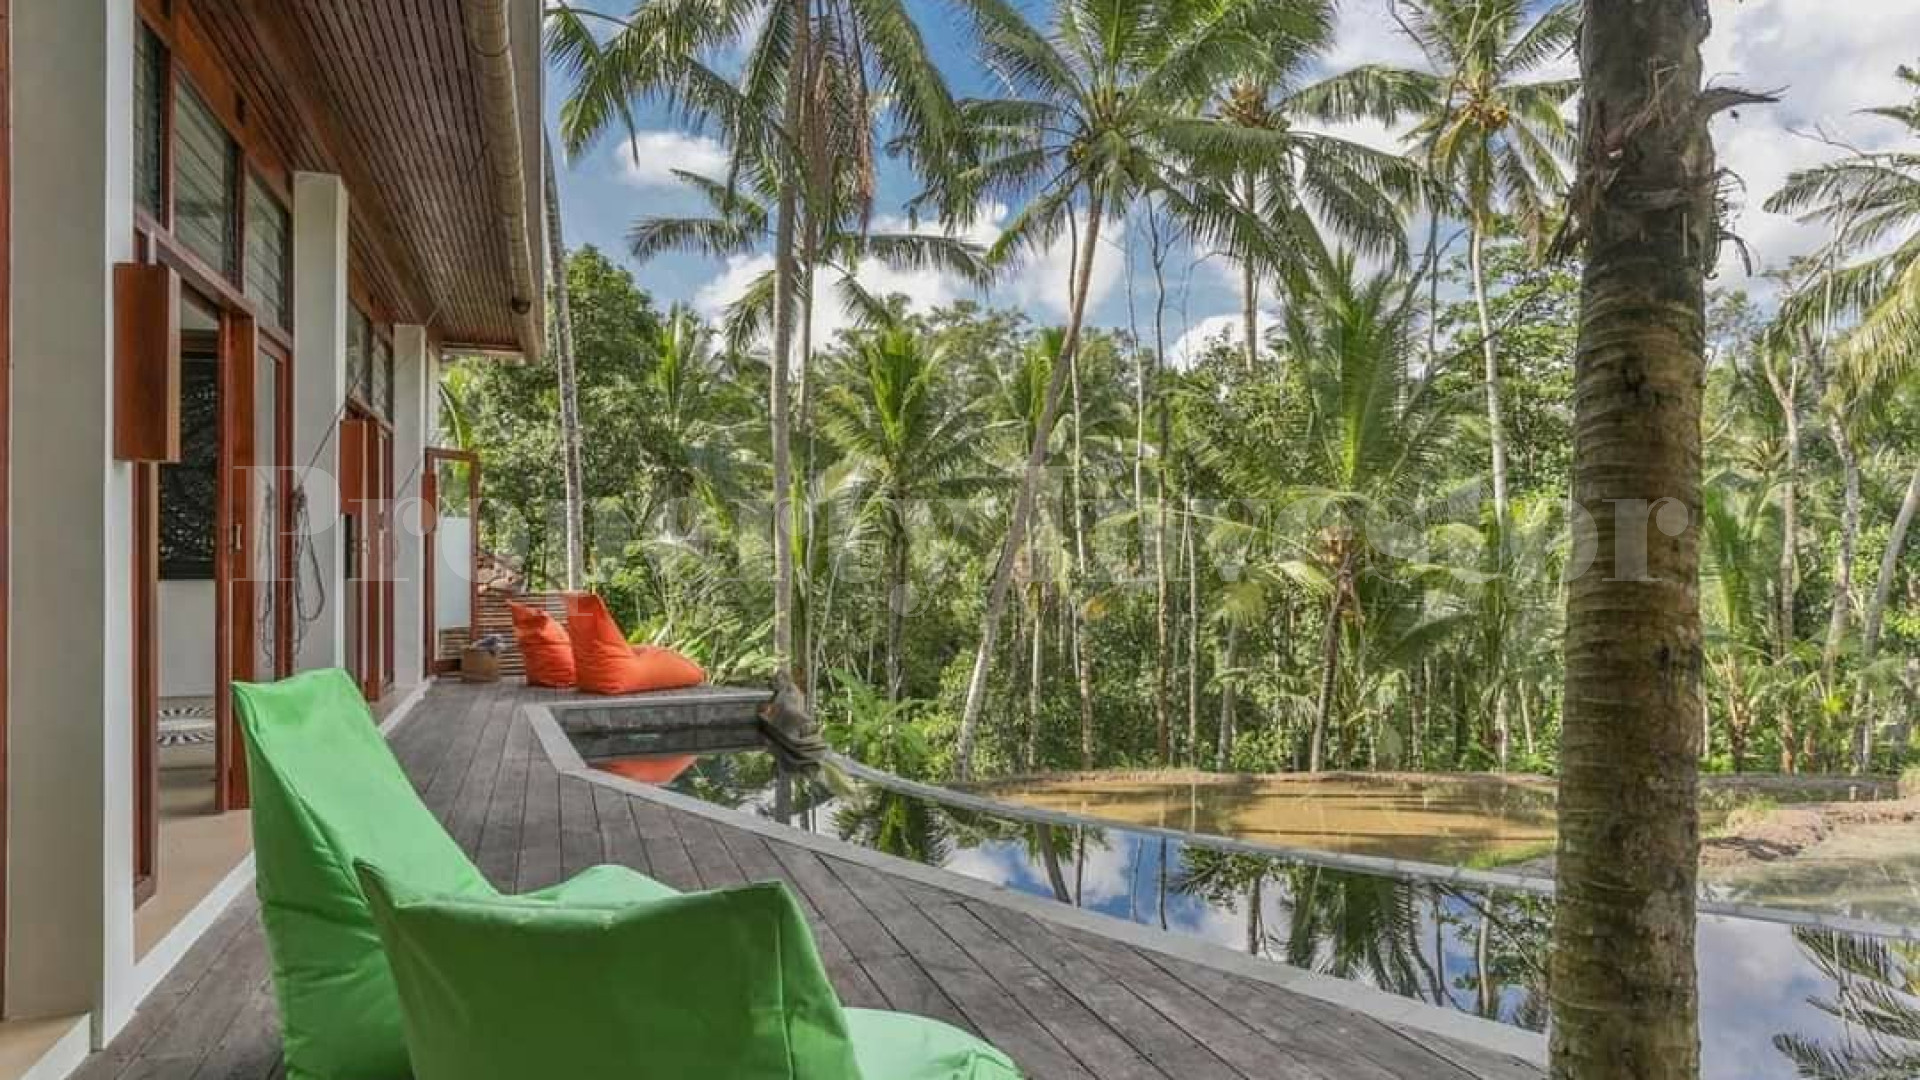 Brand New 11 Bedroom Commercial Retreat Centre with Ready Company for Sale in East Ubud, Bali